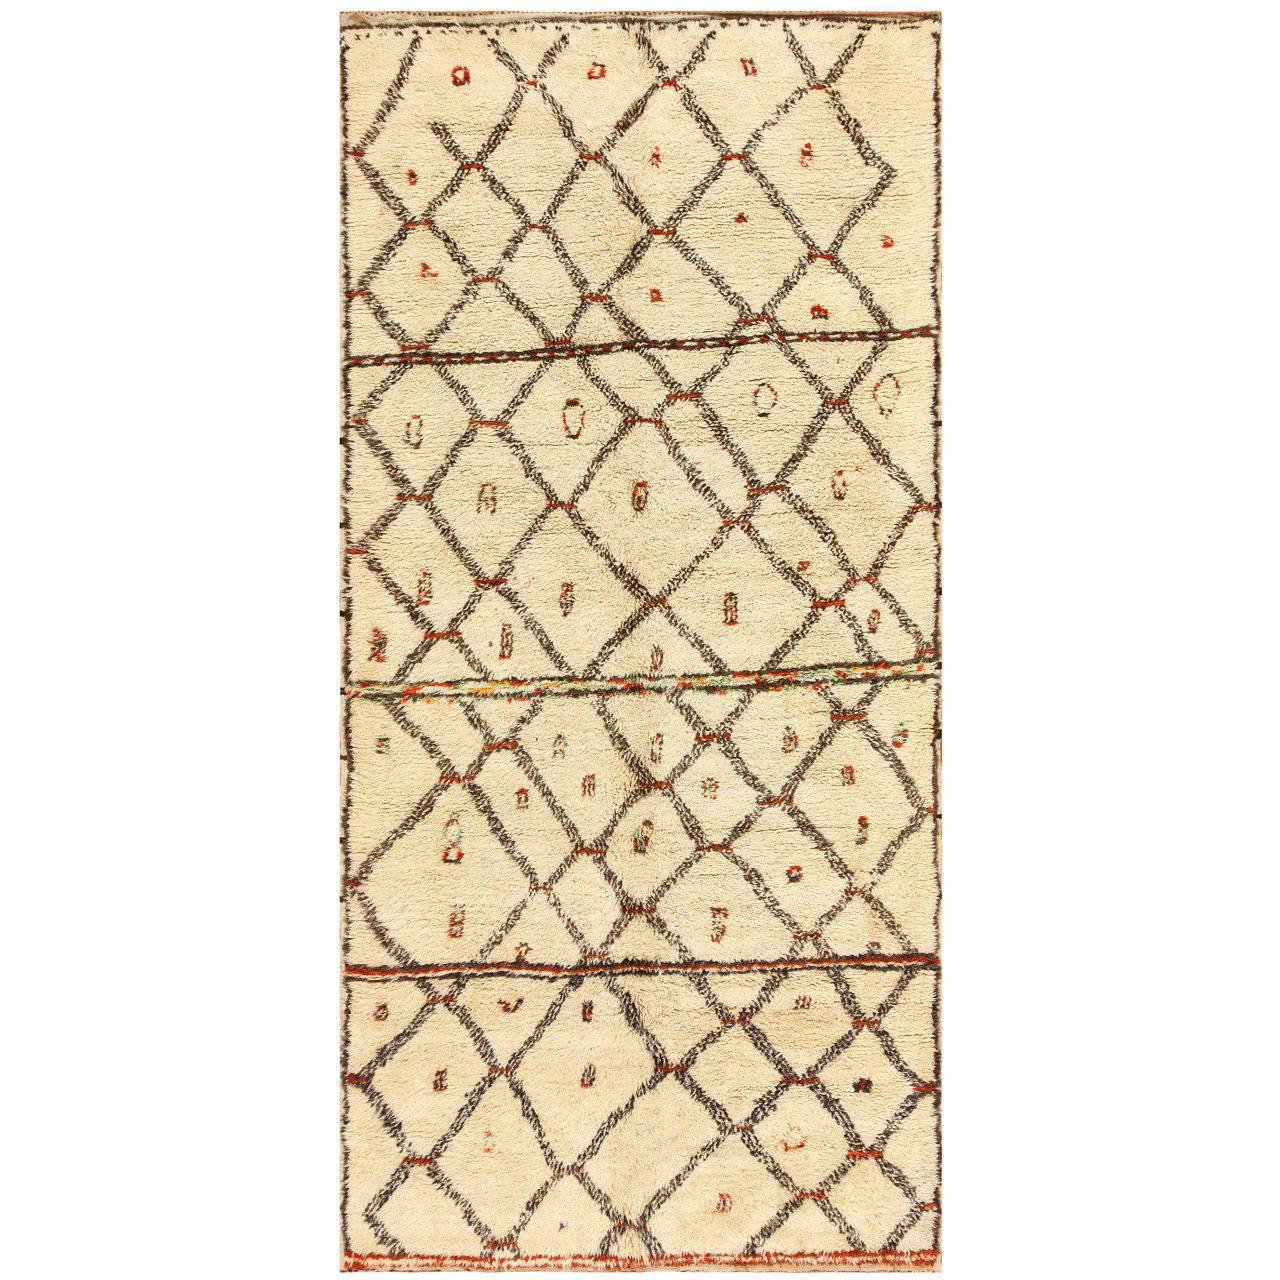 Ivory Vintage Moroccan Rug. Size: 5 ft 8 in x 12 ft